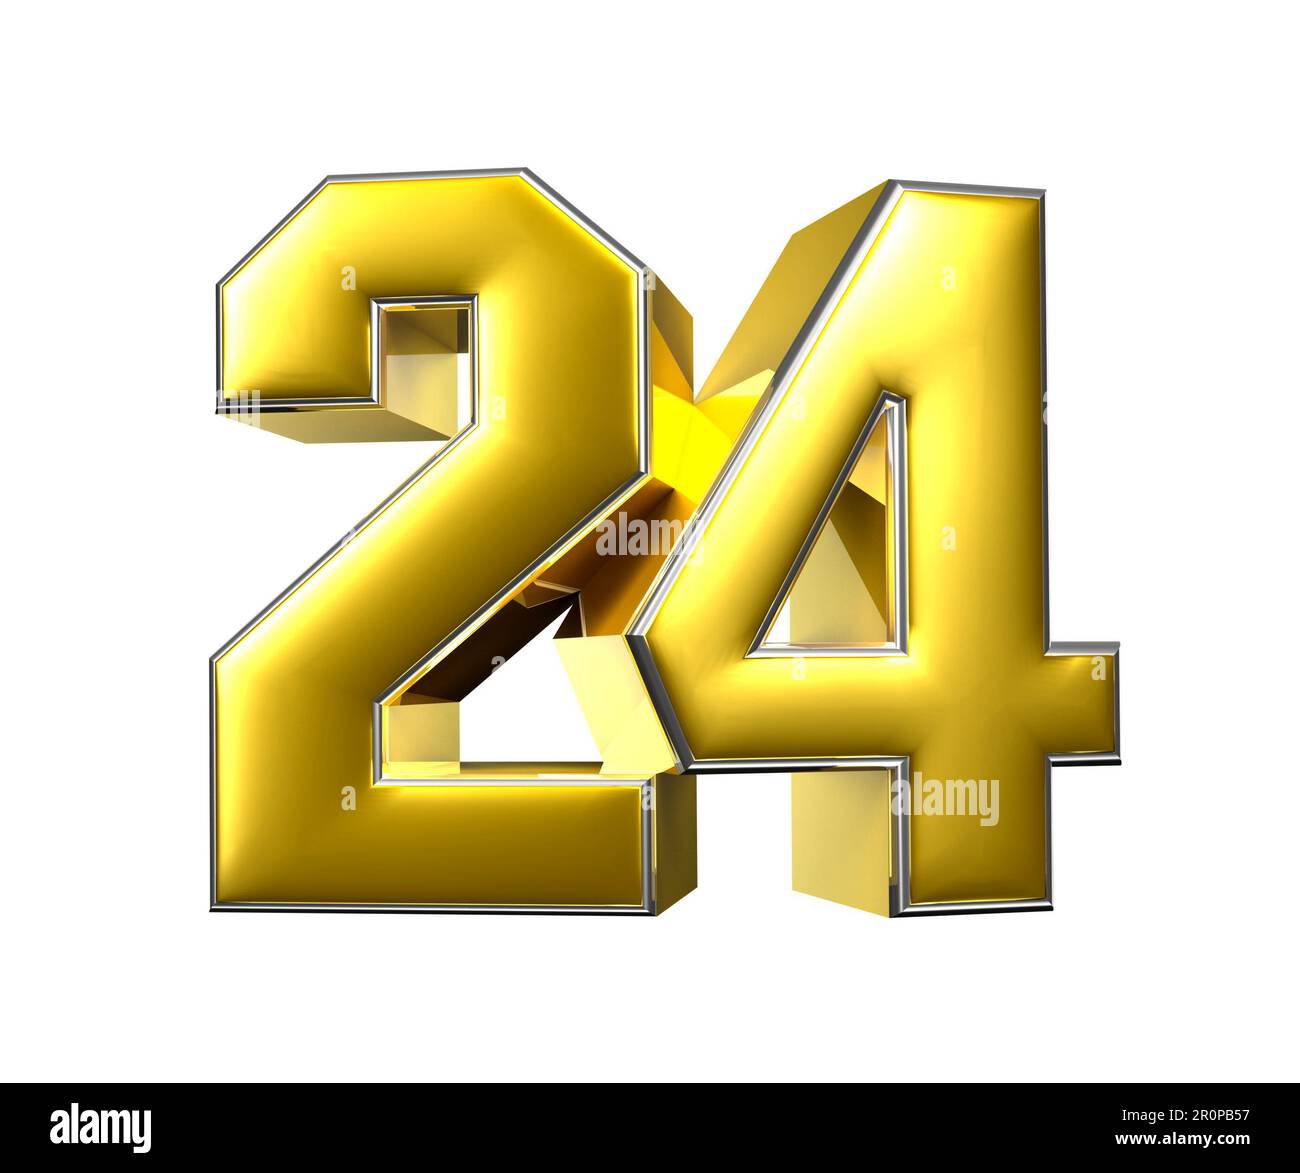 532 Number 24 Clip Images, Stock Photos, 3D objects, & Vectors